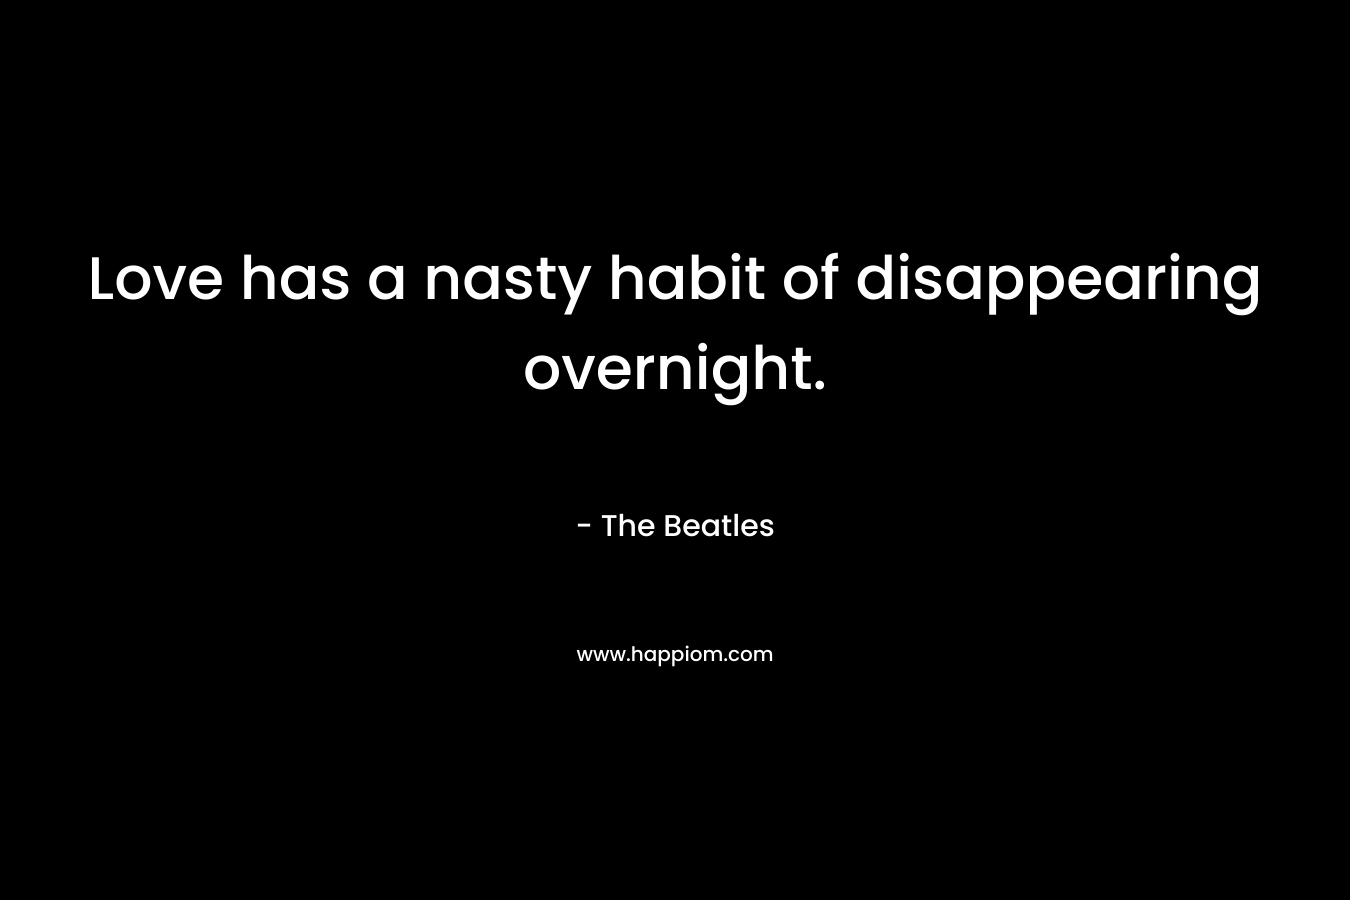 Love has a nasty habit of disappearing overnight.